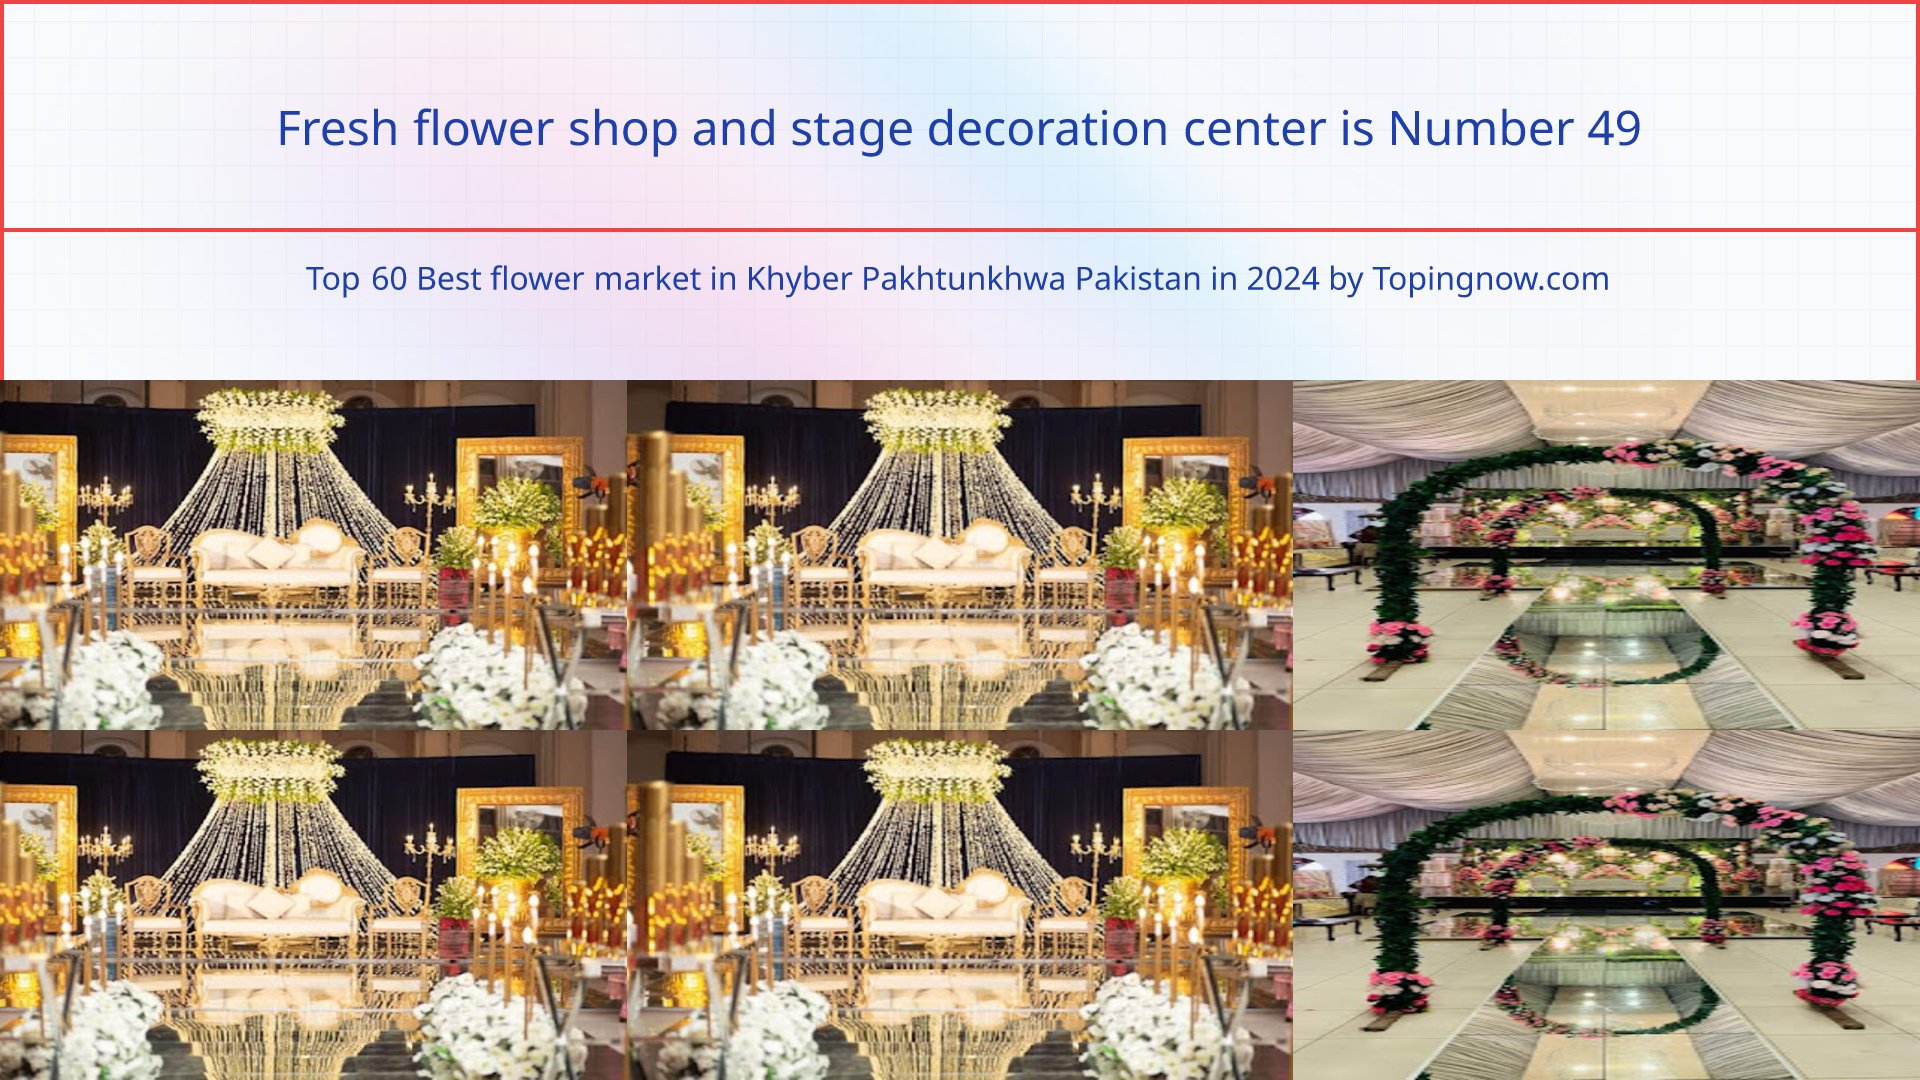 Fresh flower shop and stage decoration center: Top 60 Best flower market in Khyber Pakhtunkhwa Pakistan in 2024